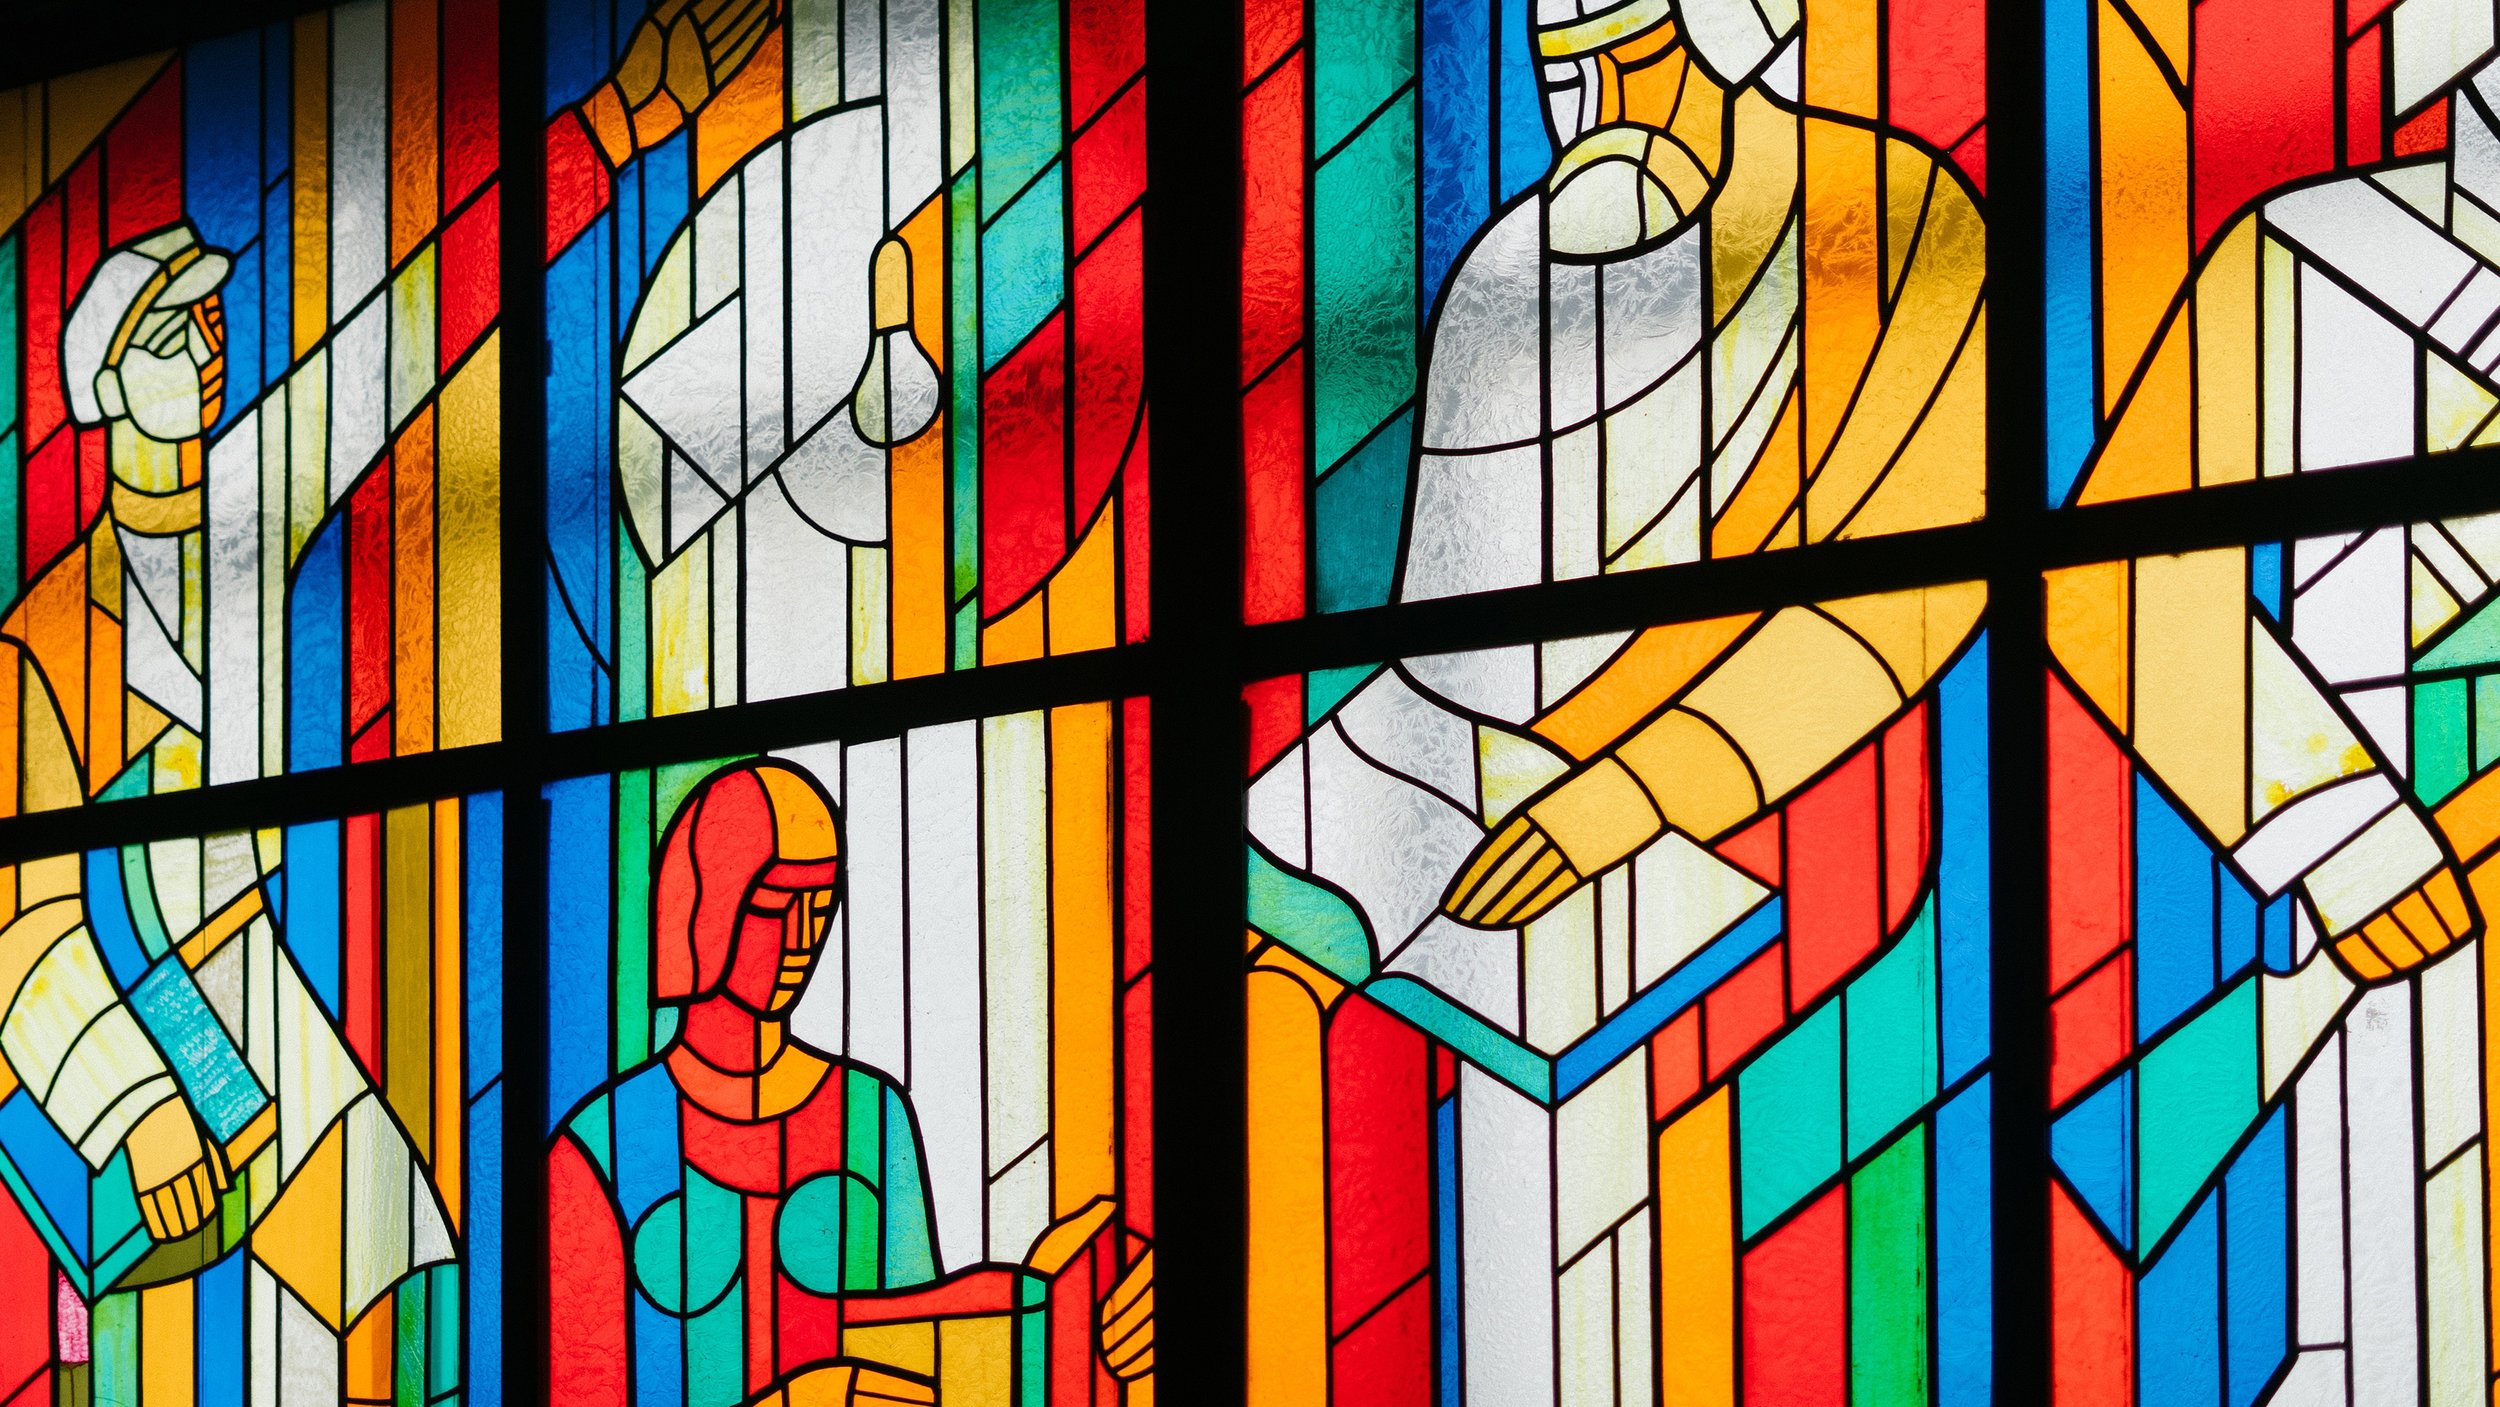 Blue-Red-Orange-Yellow Stain Glass Window of Persons Reading Opened Books